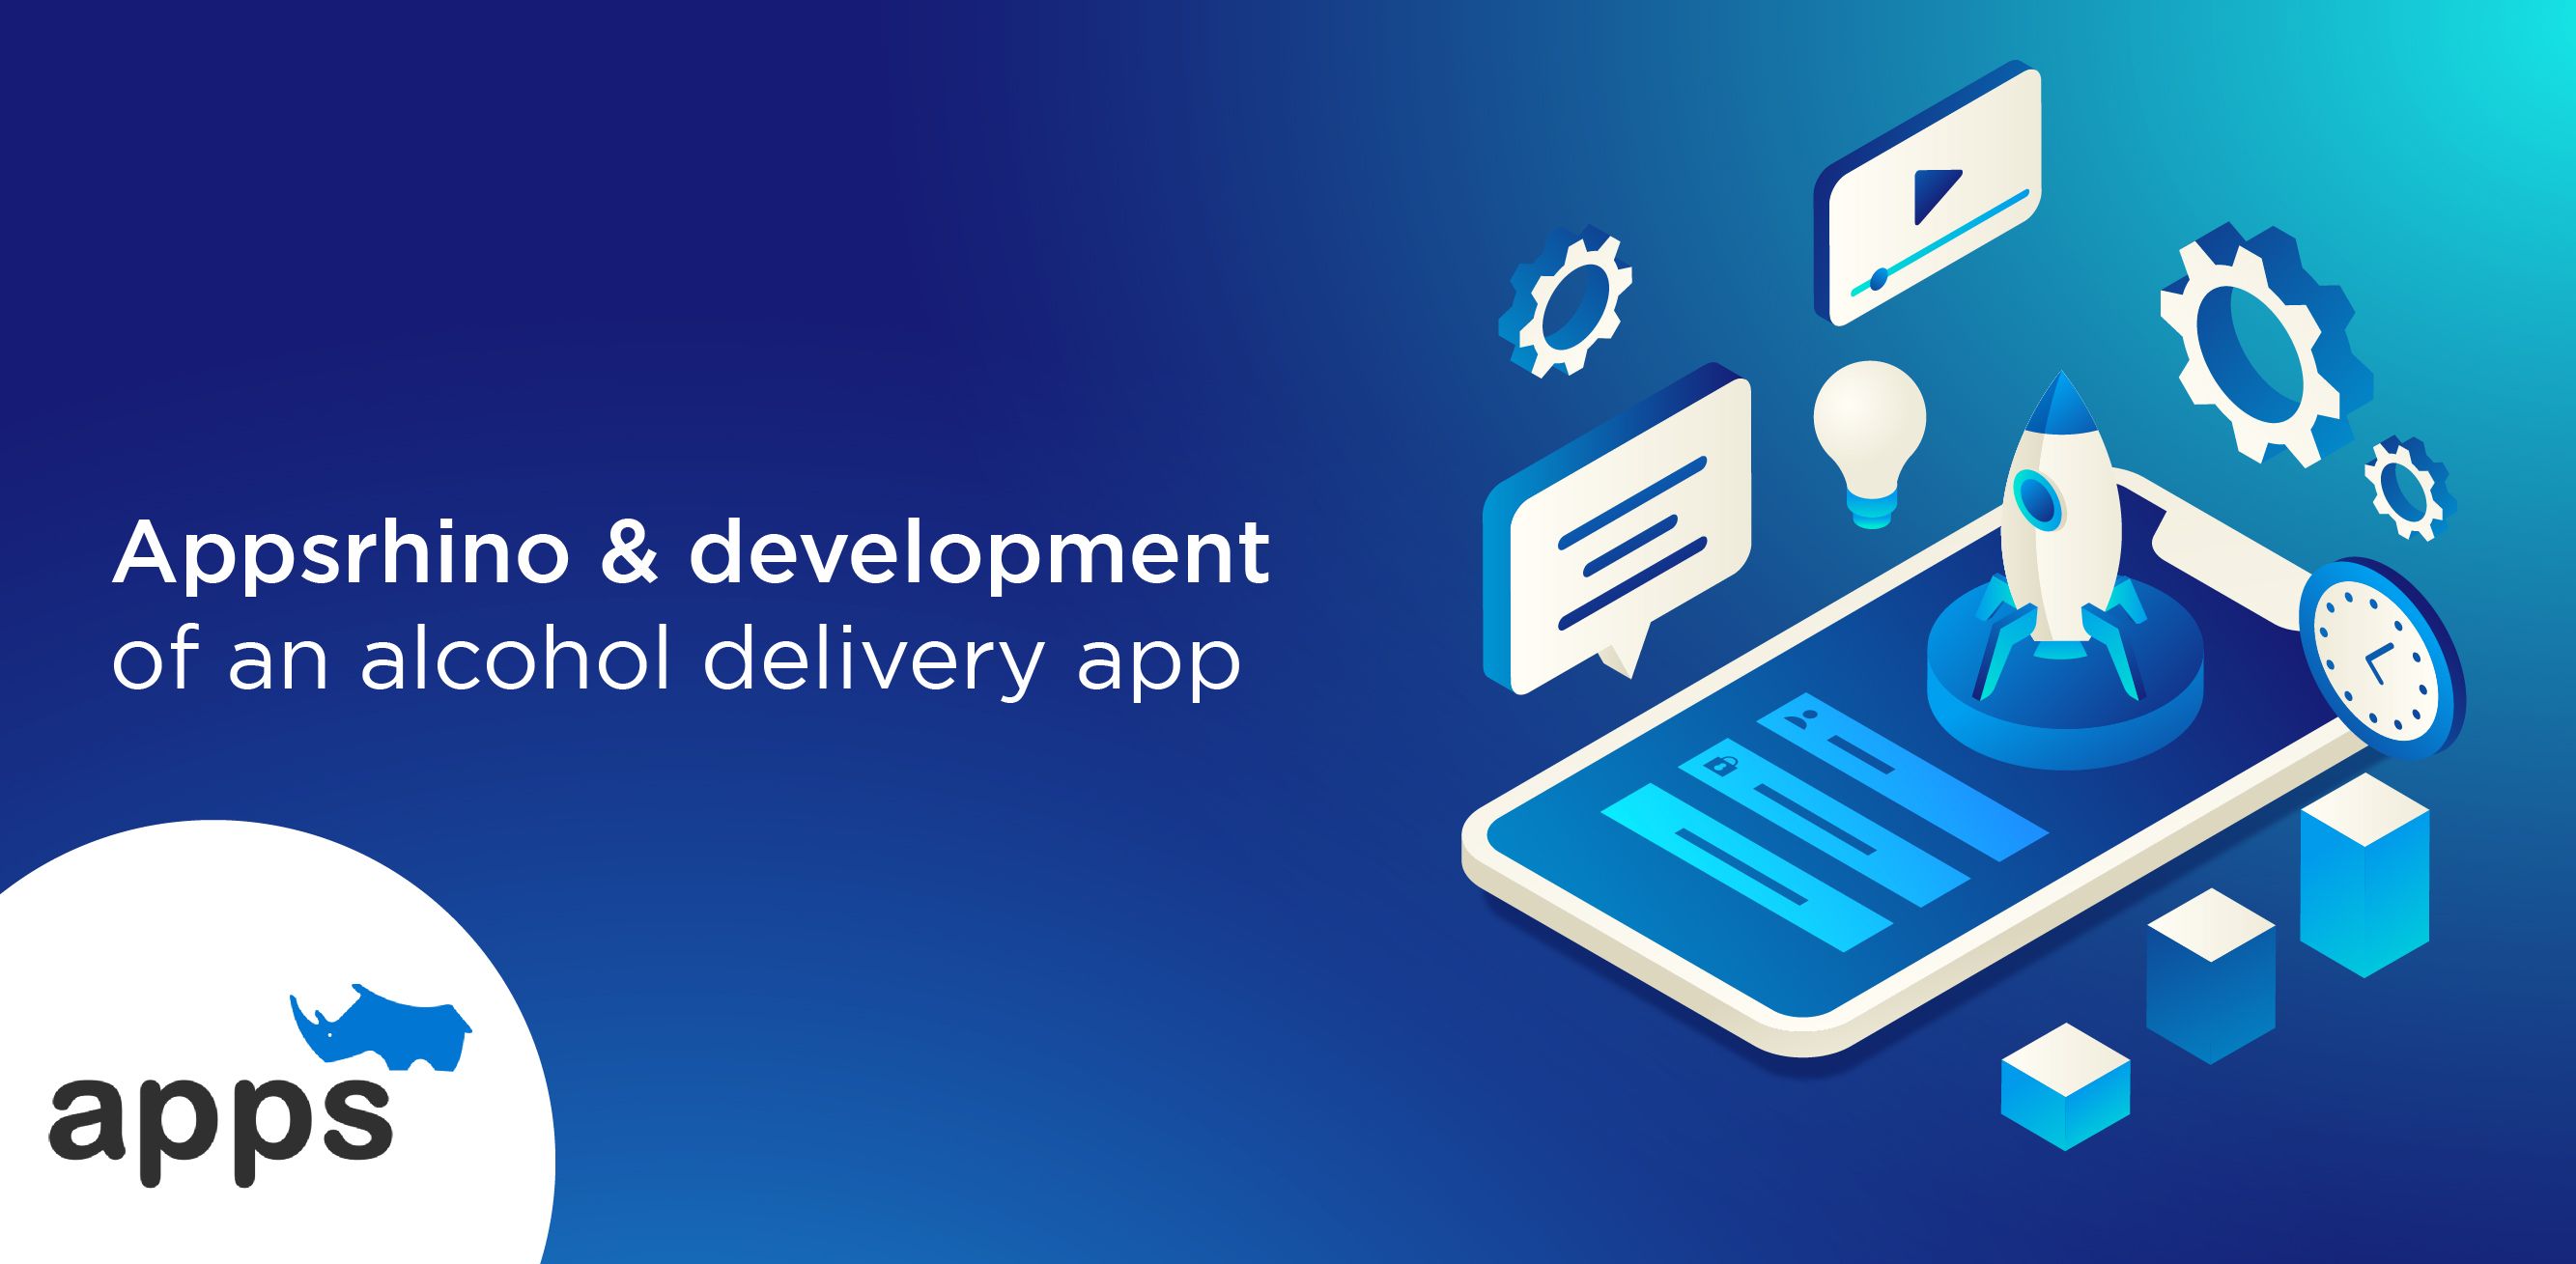 Appsrhino & development of an alcohol delivery app